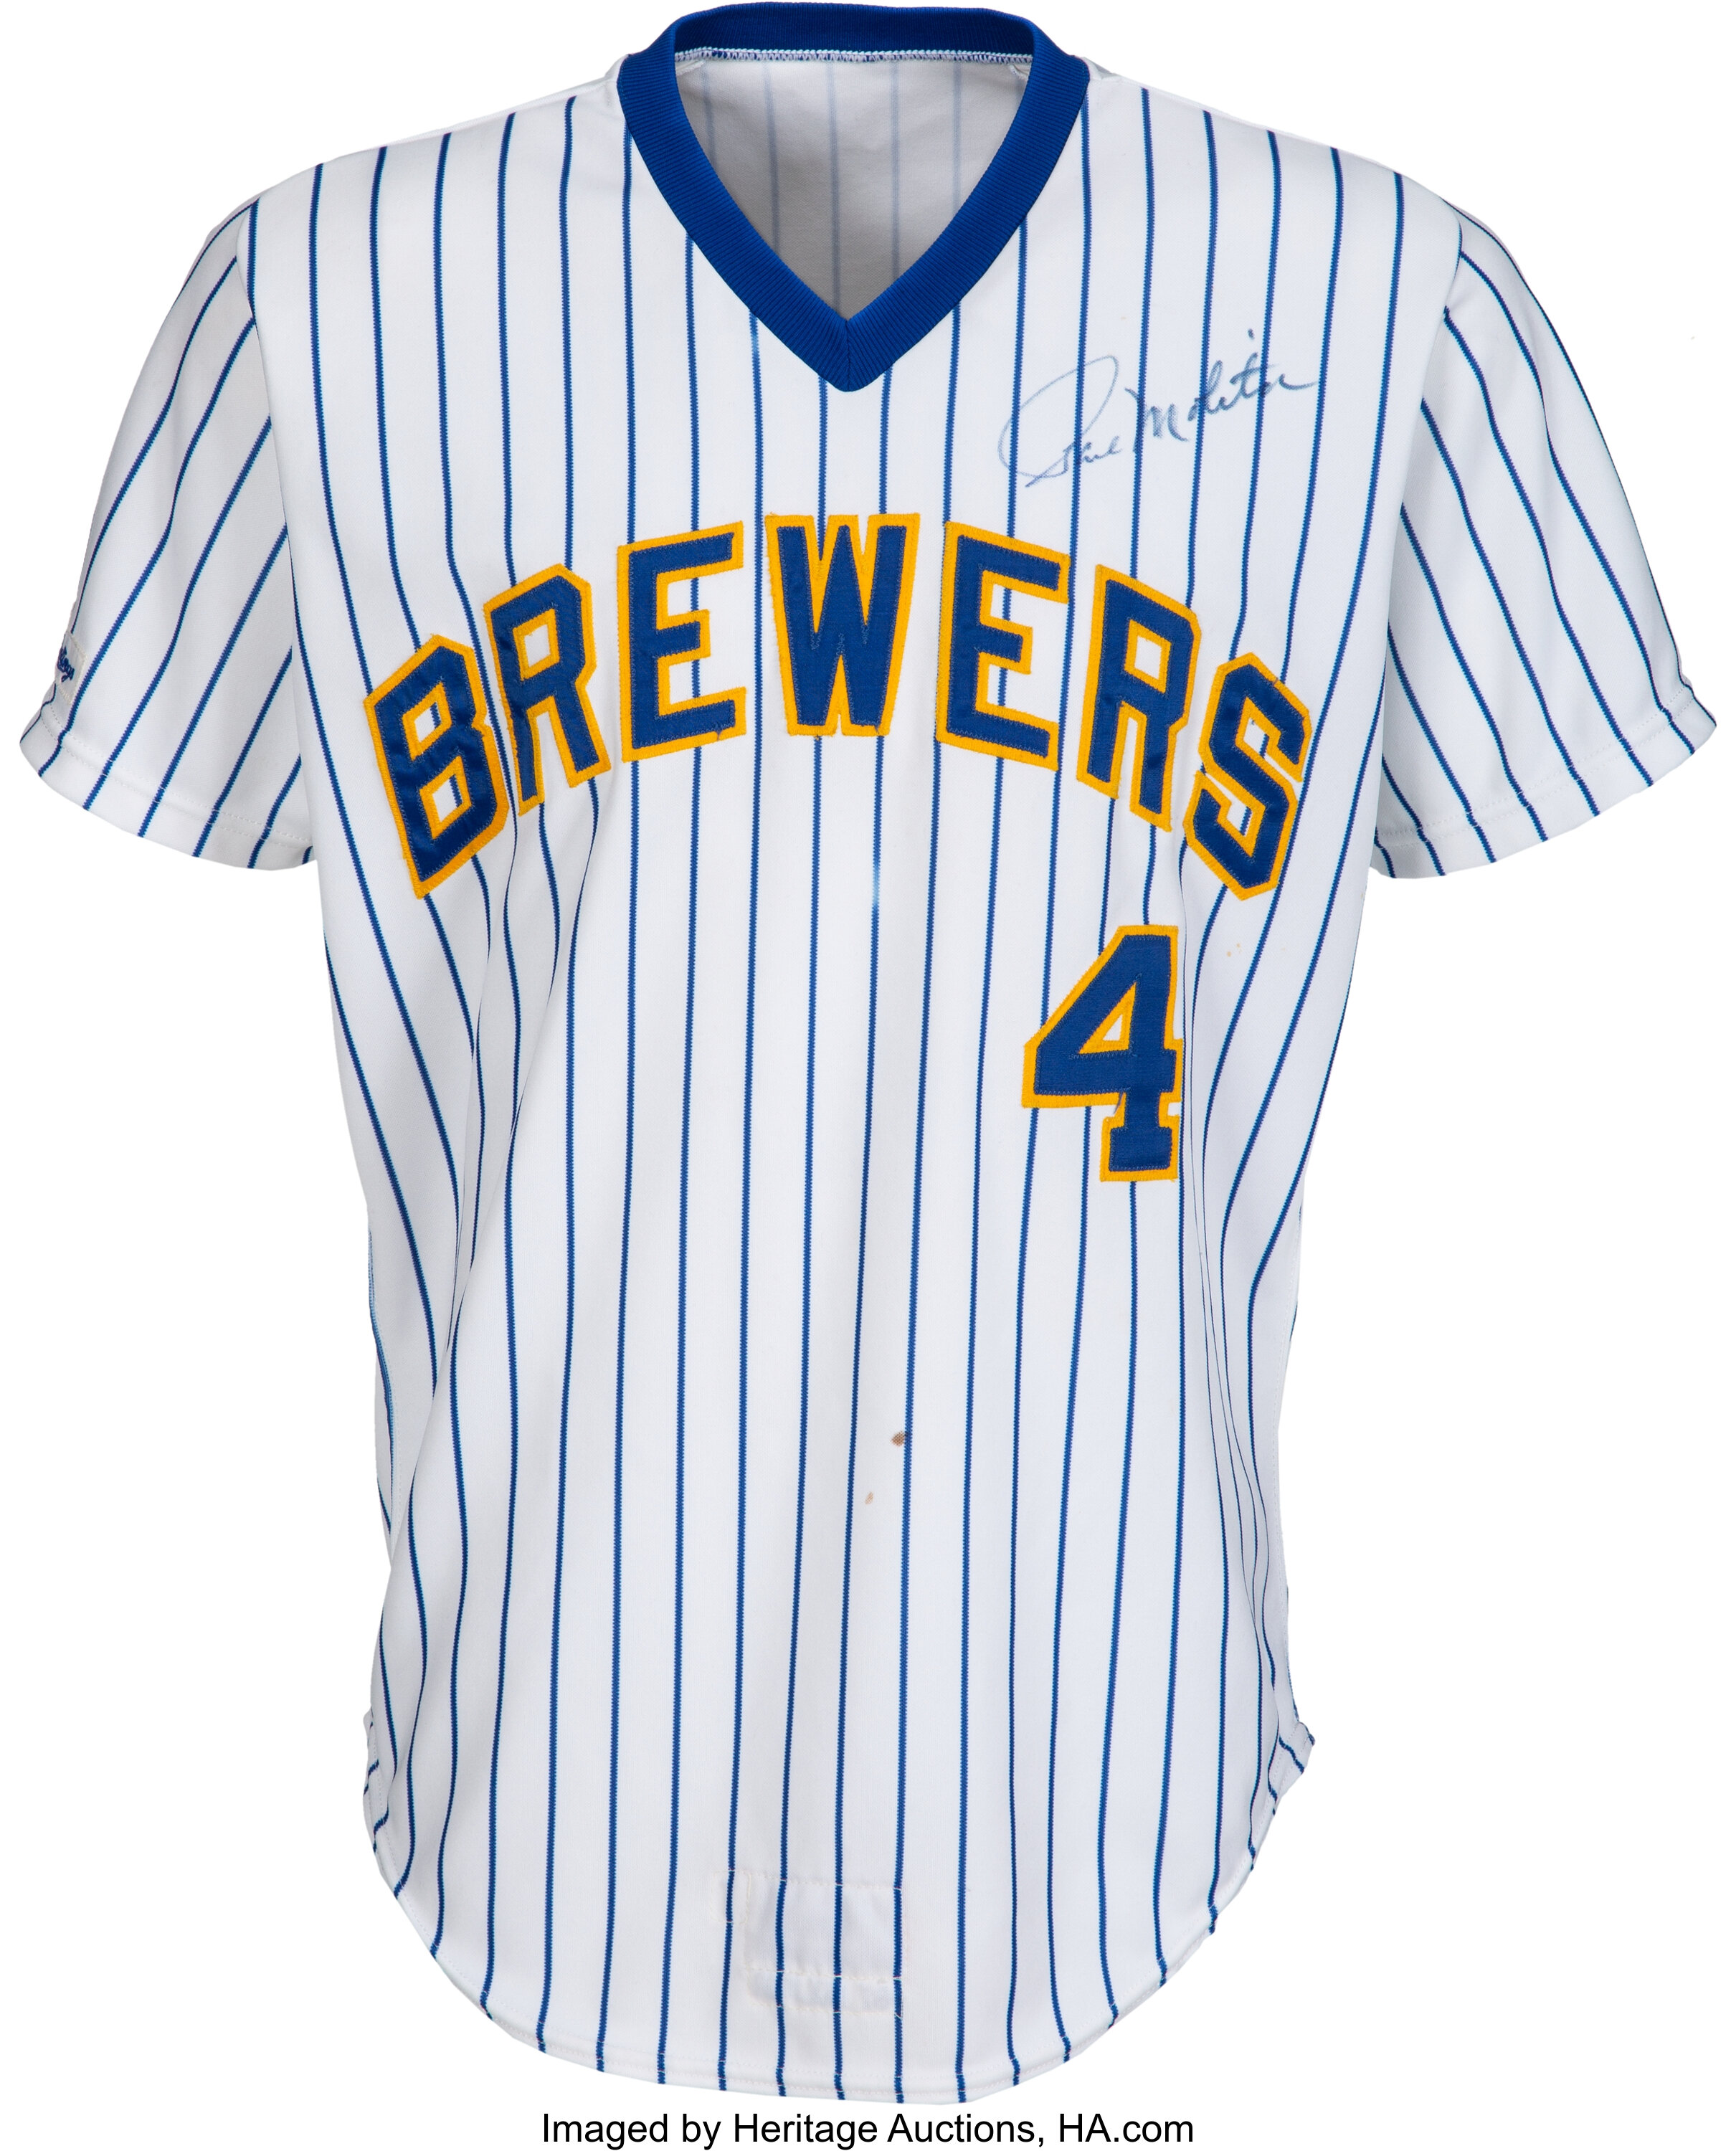 4 PAUL MOLITOR Milwaukee Brewers MLB IF/DH Blue Throwback Jersey